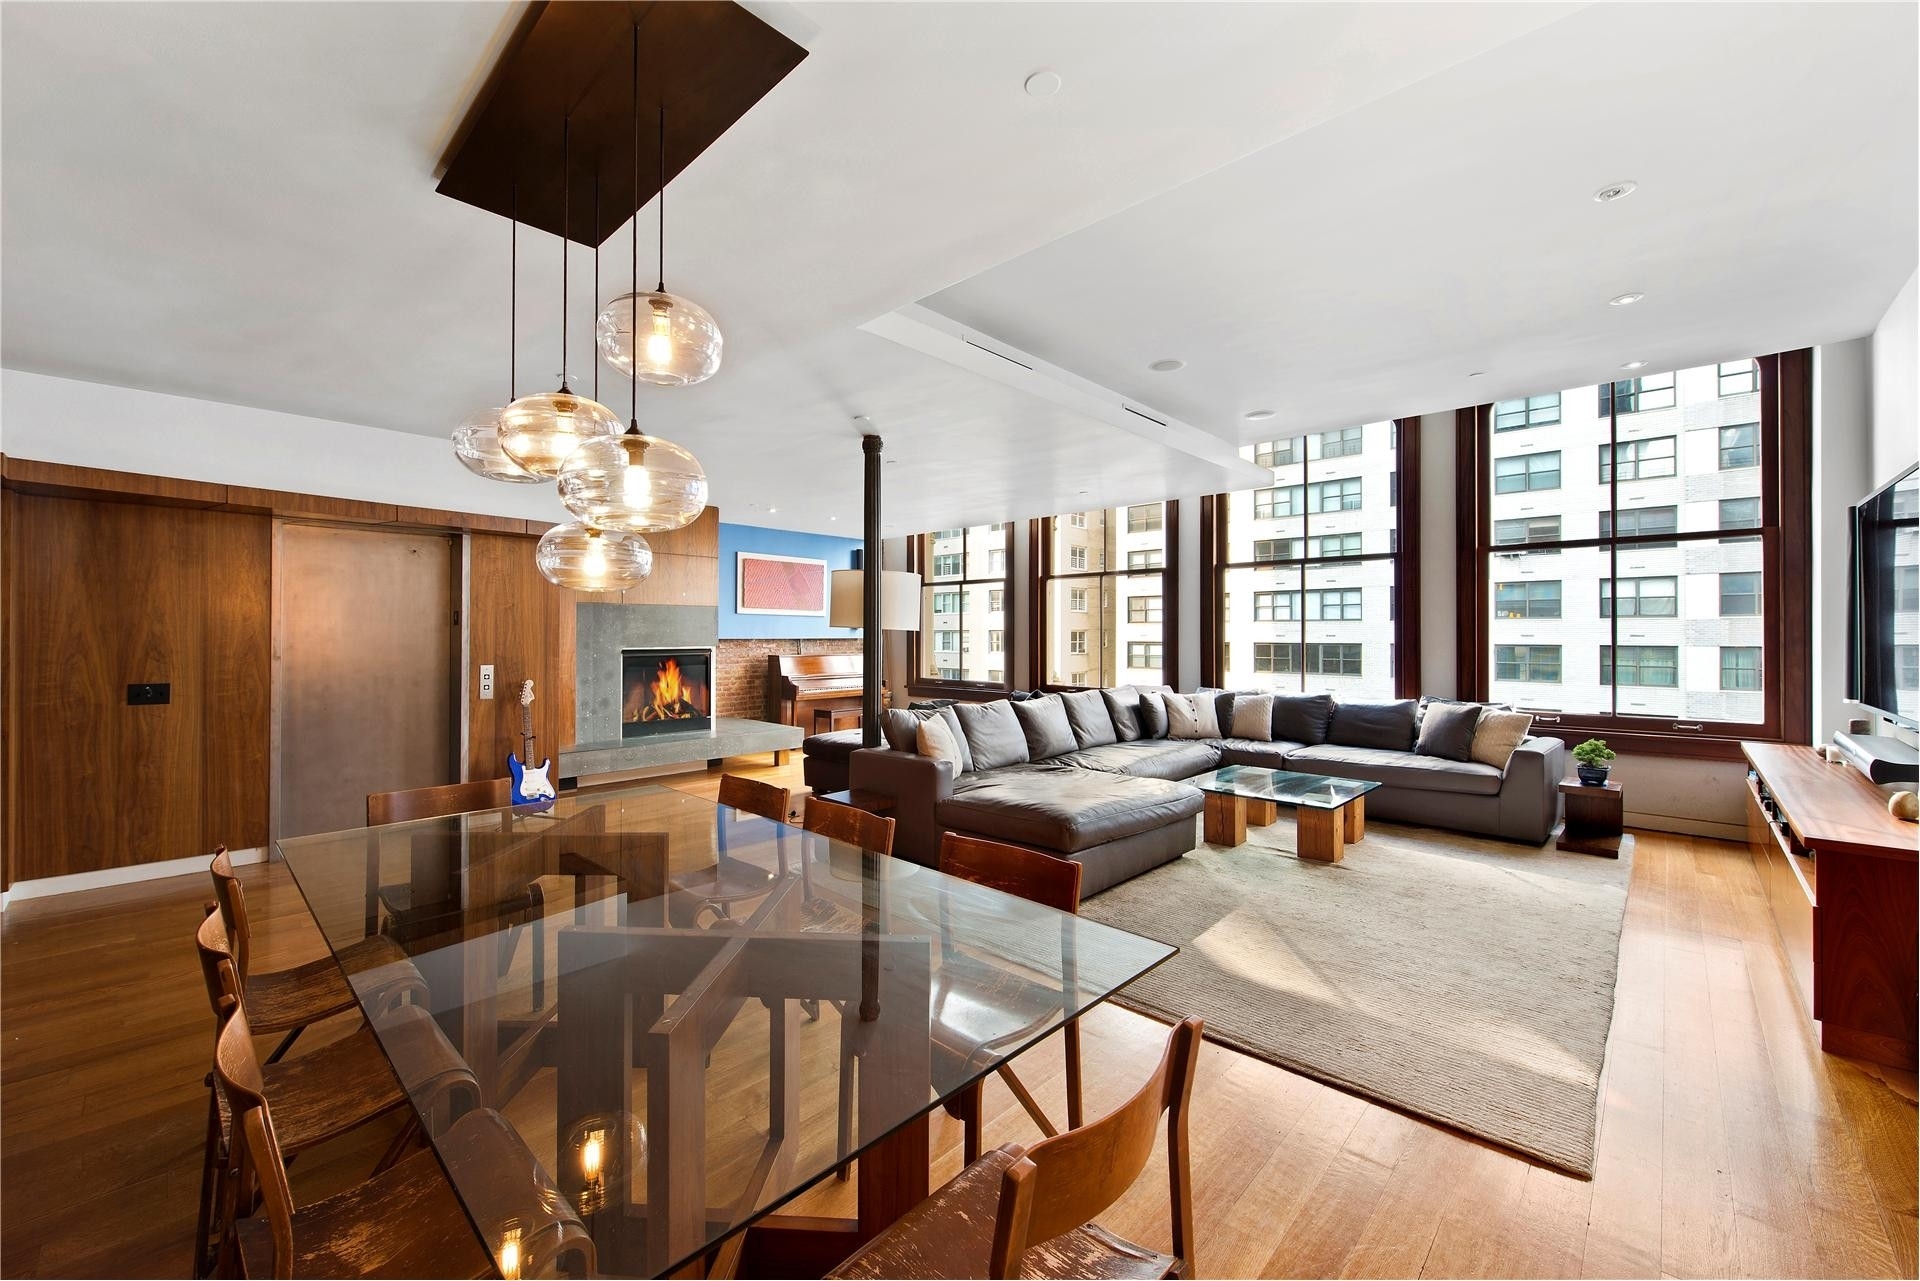 Property at Union Square Lofts, 10 East 14th St, 6 New York